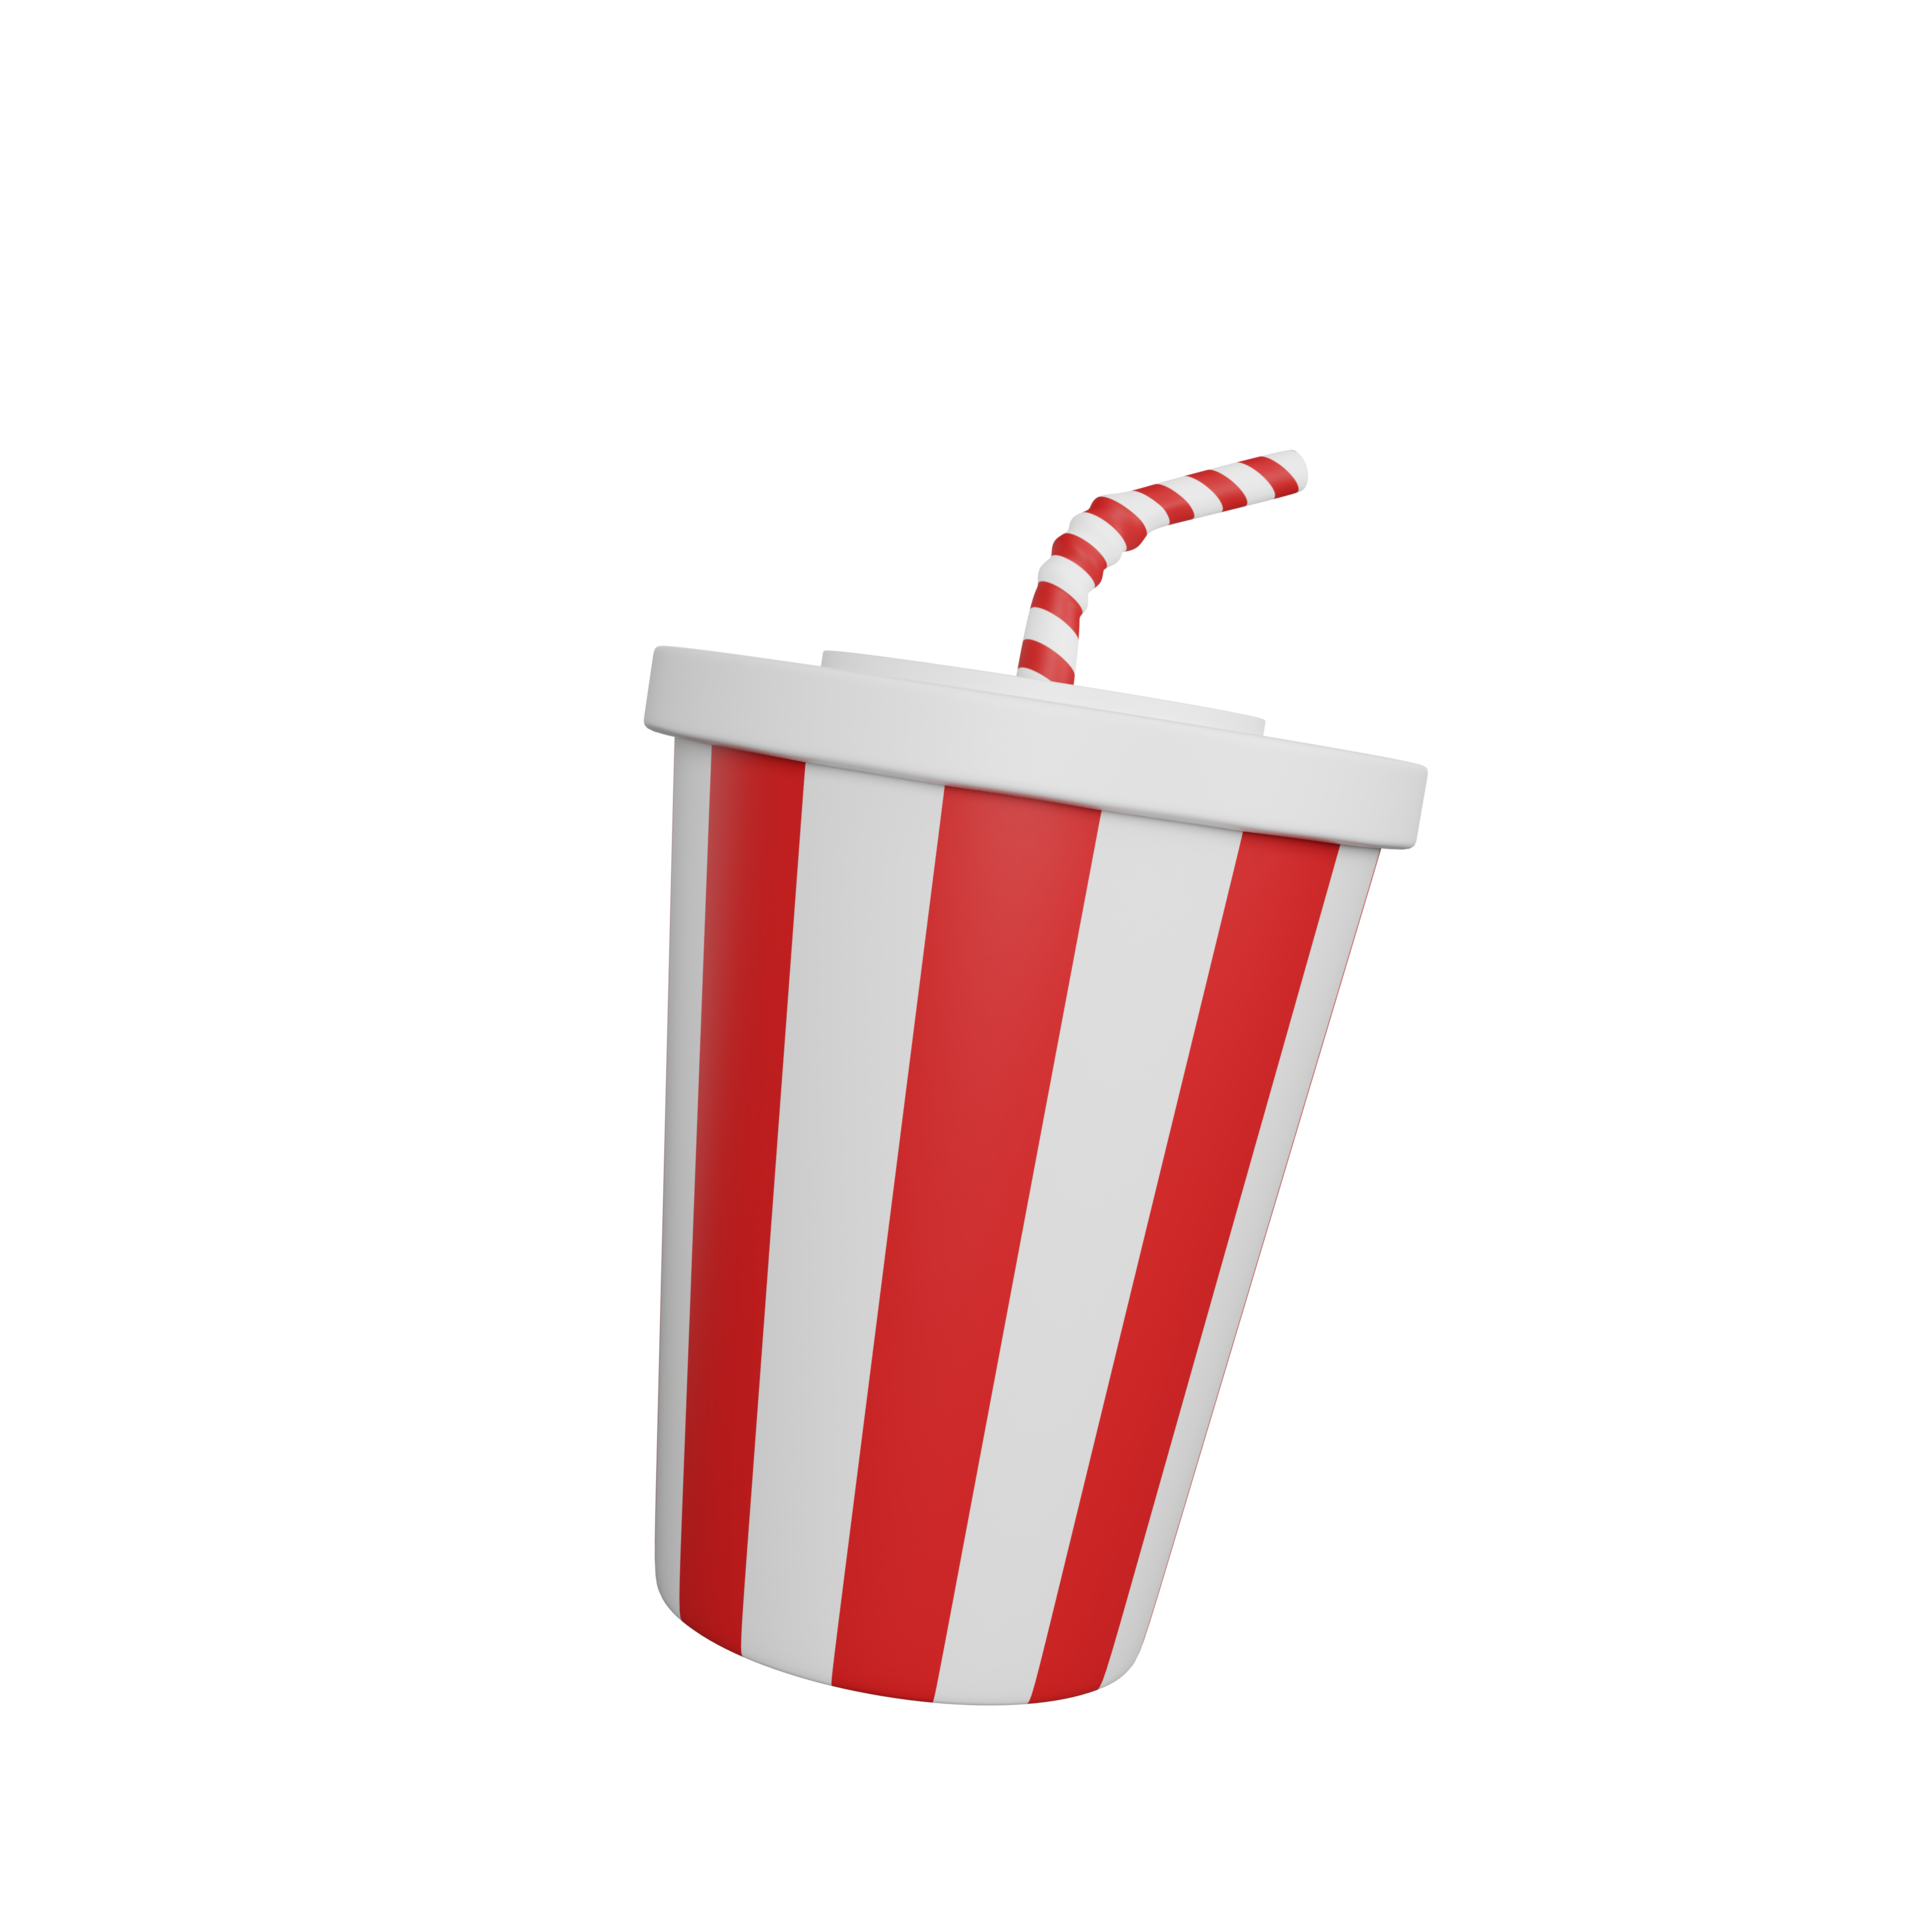 https://static.vecteezy.com/system/resources/previews/013/995/946/original/3d-rendering-of-soda-cup-fast-food-icon-png.png